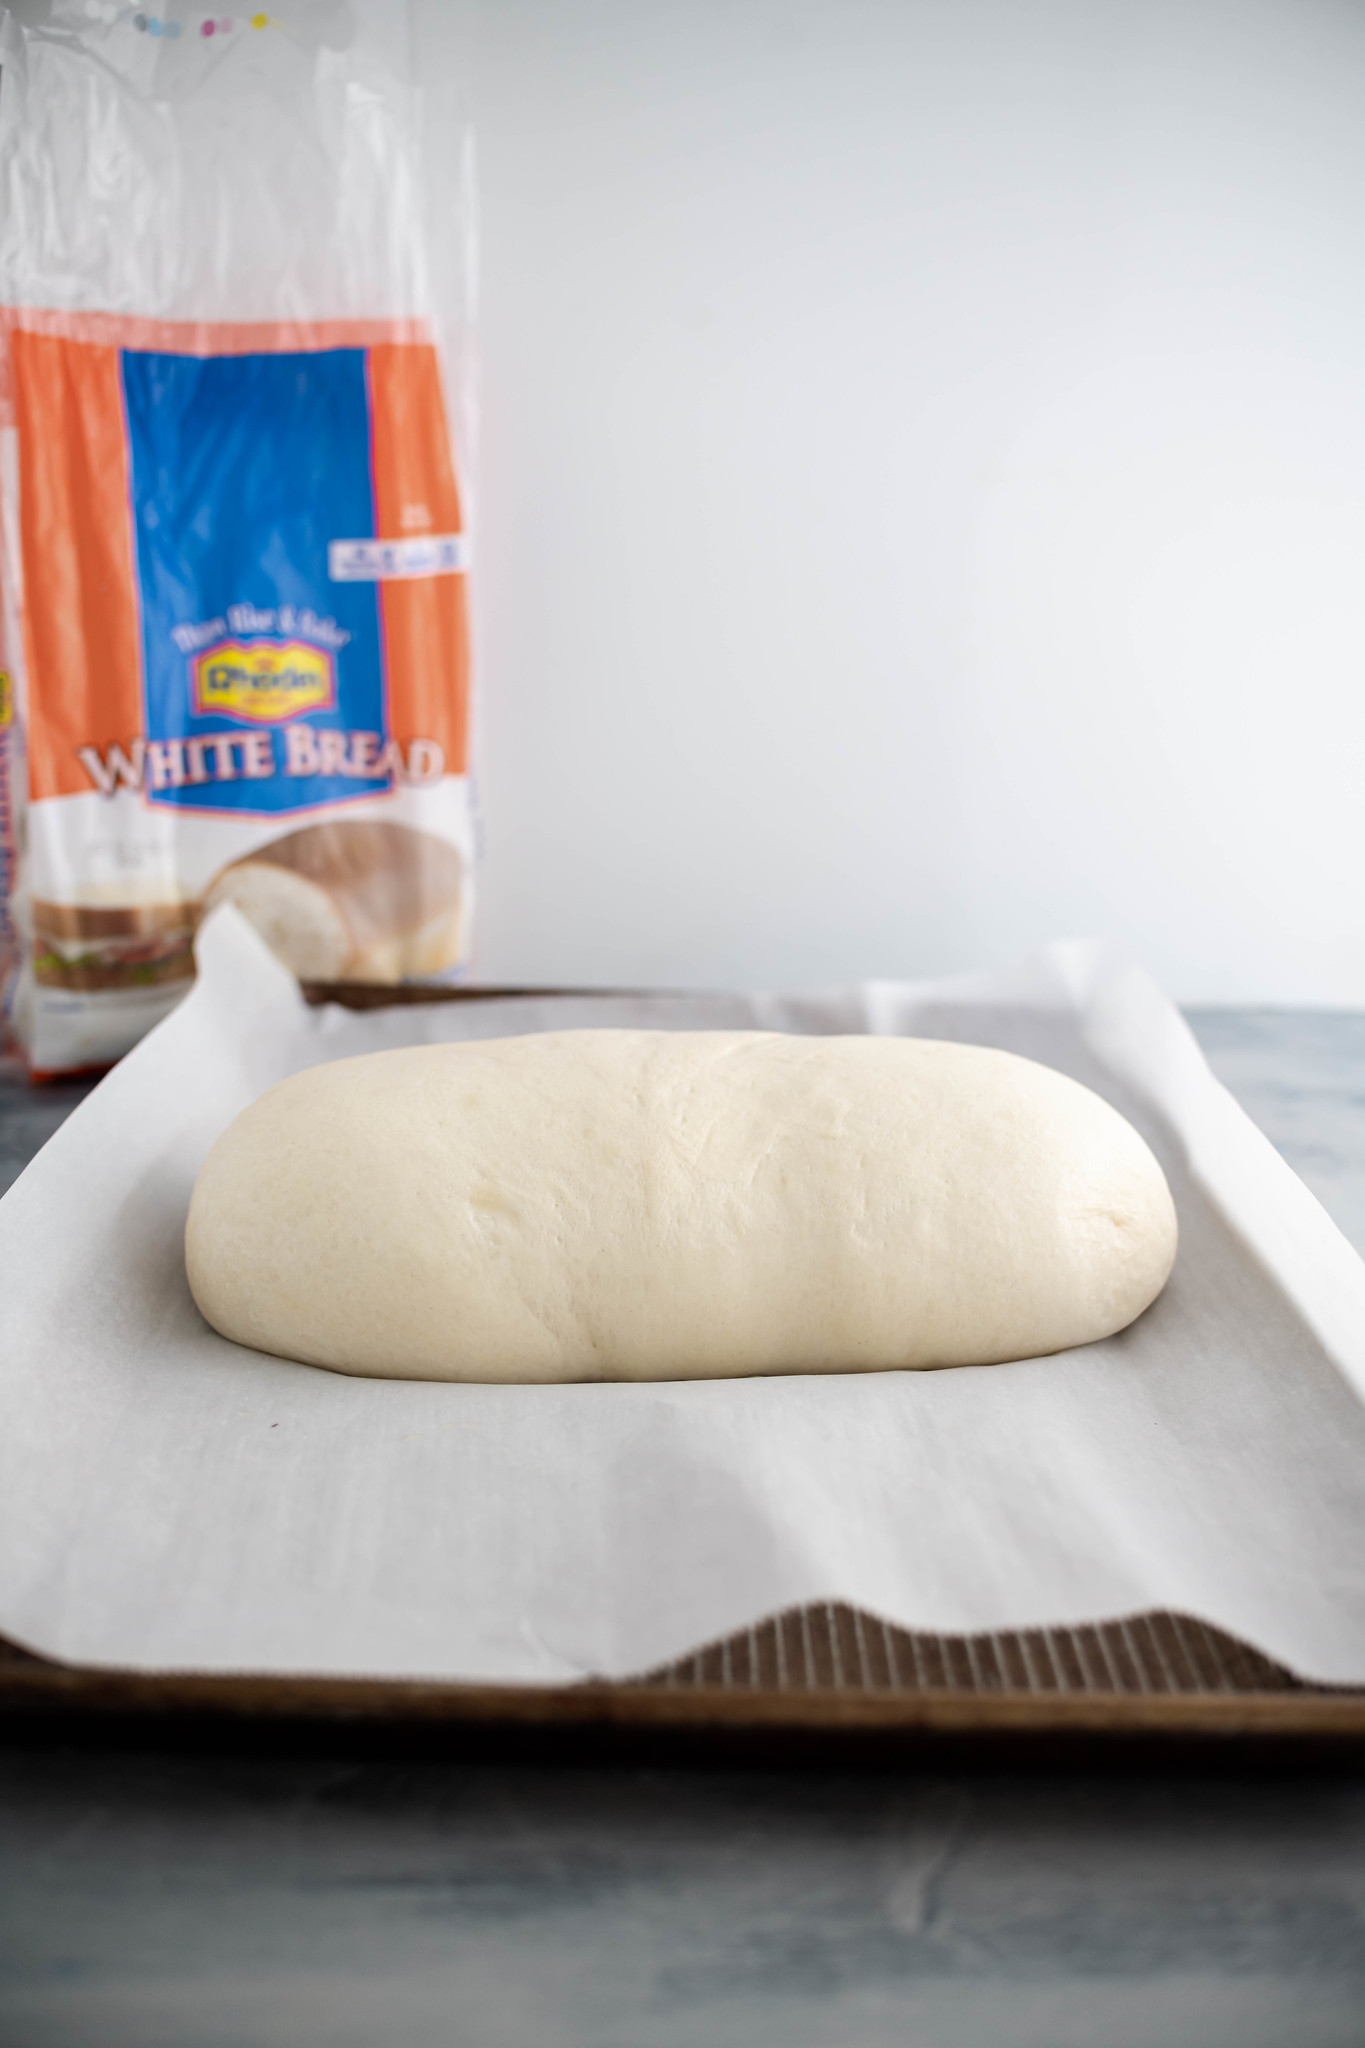 One risen loaf of Rhodes bread dough on a parchment lined baking sheet.